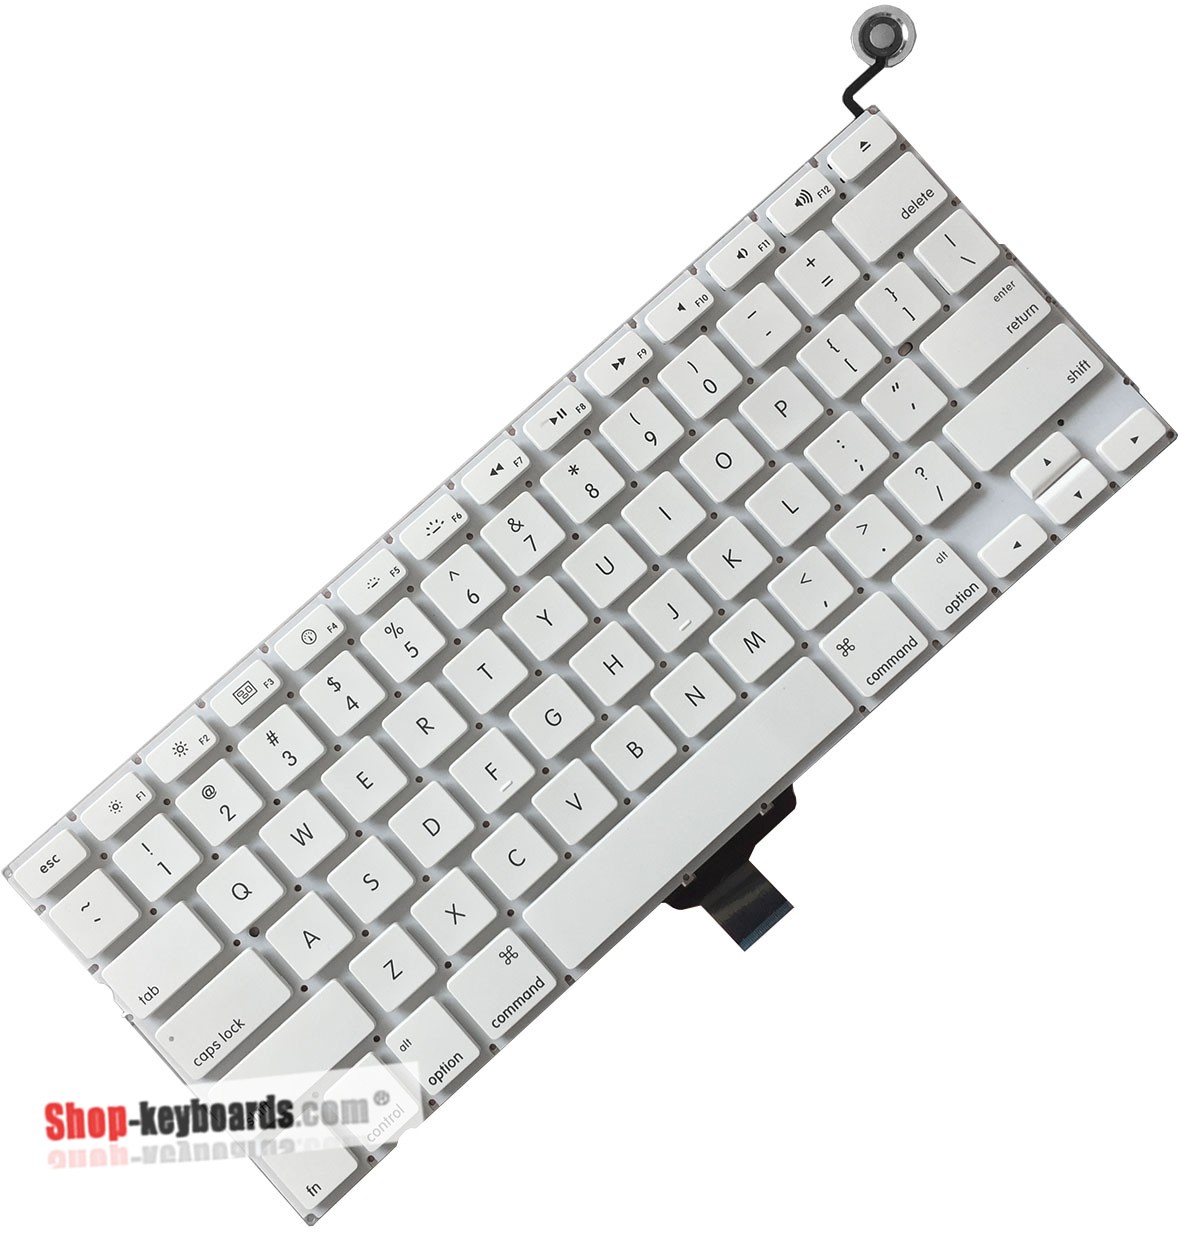 Apple A1342 EMC 2395 Keyboard replacement